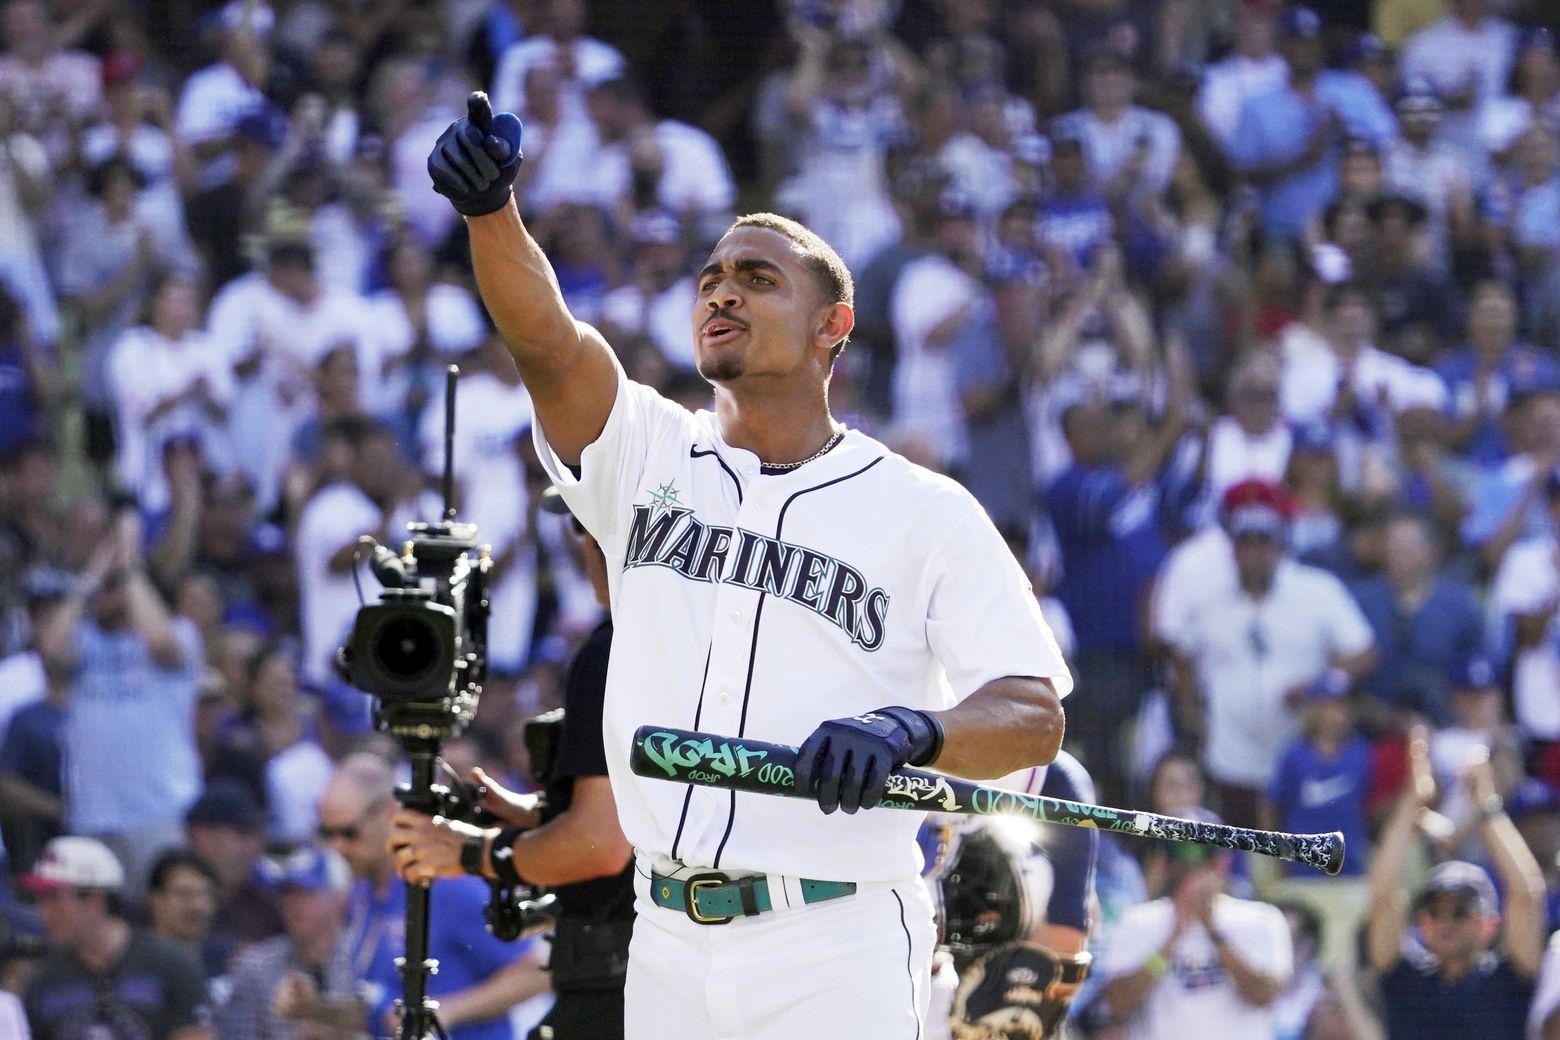 A Grip on Sports: Nothing will ever be the same for Julio Rodriguez and the Mariners &#8211; The Spokesman Review 07182022 updates 175622